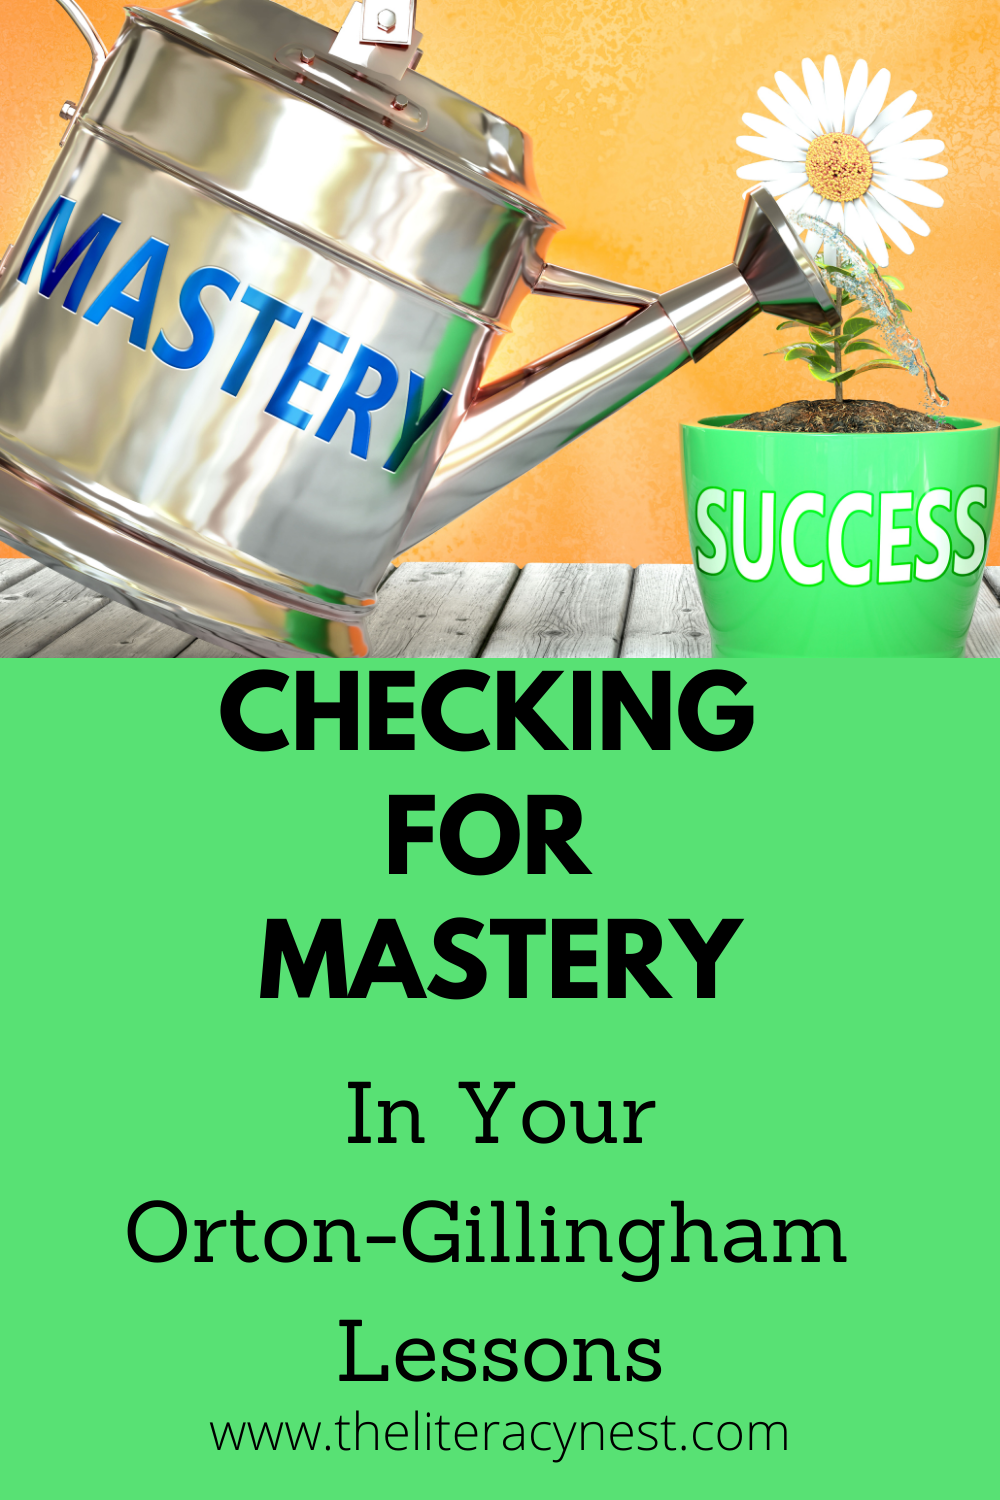 mastery in Orton-Gillingham lessons